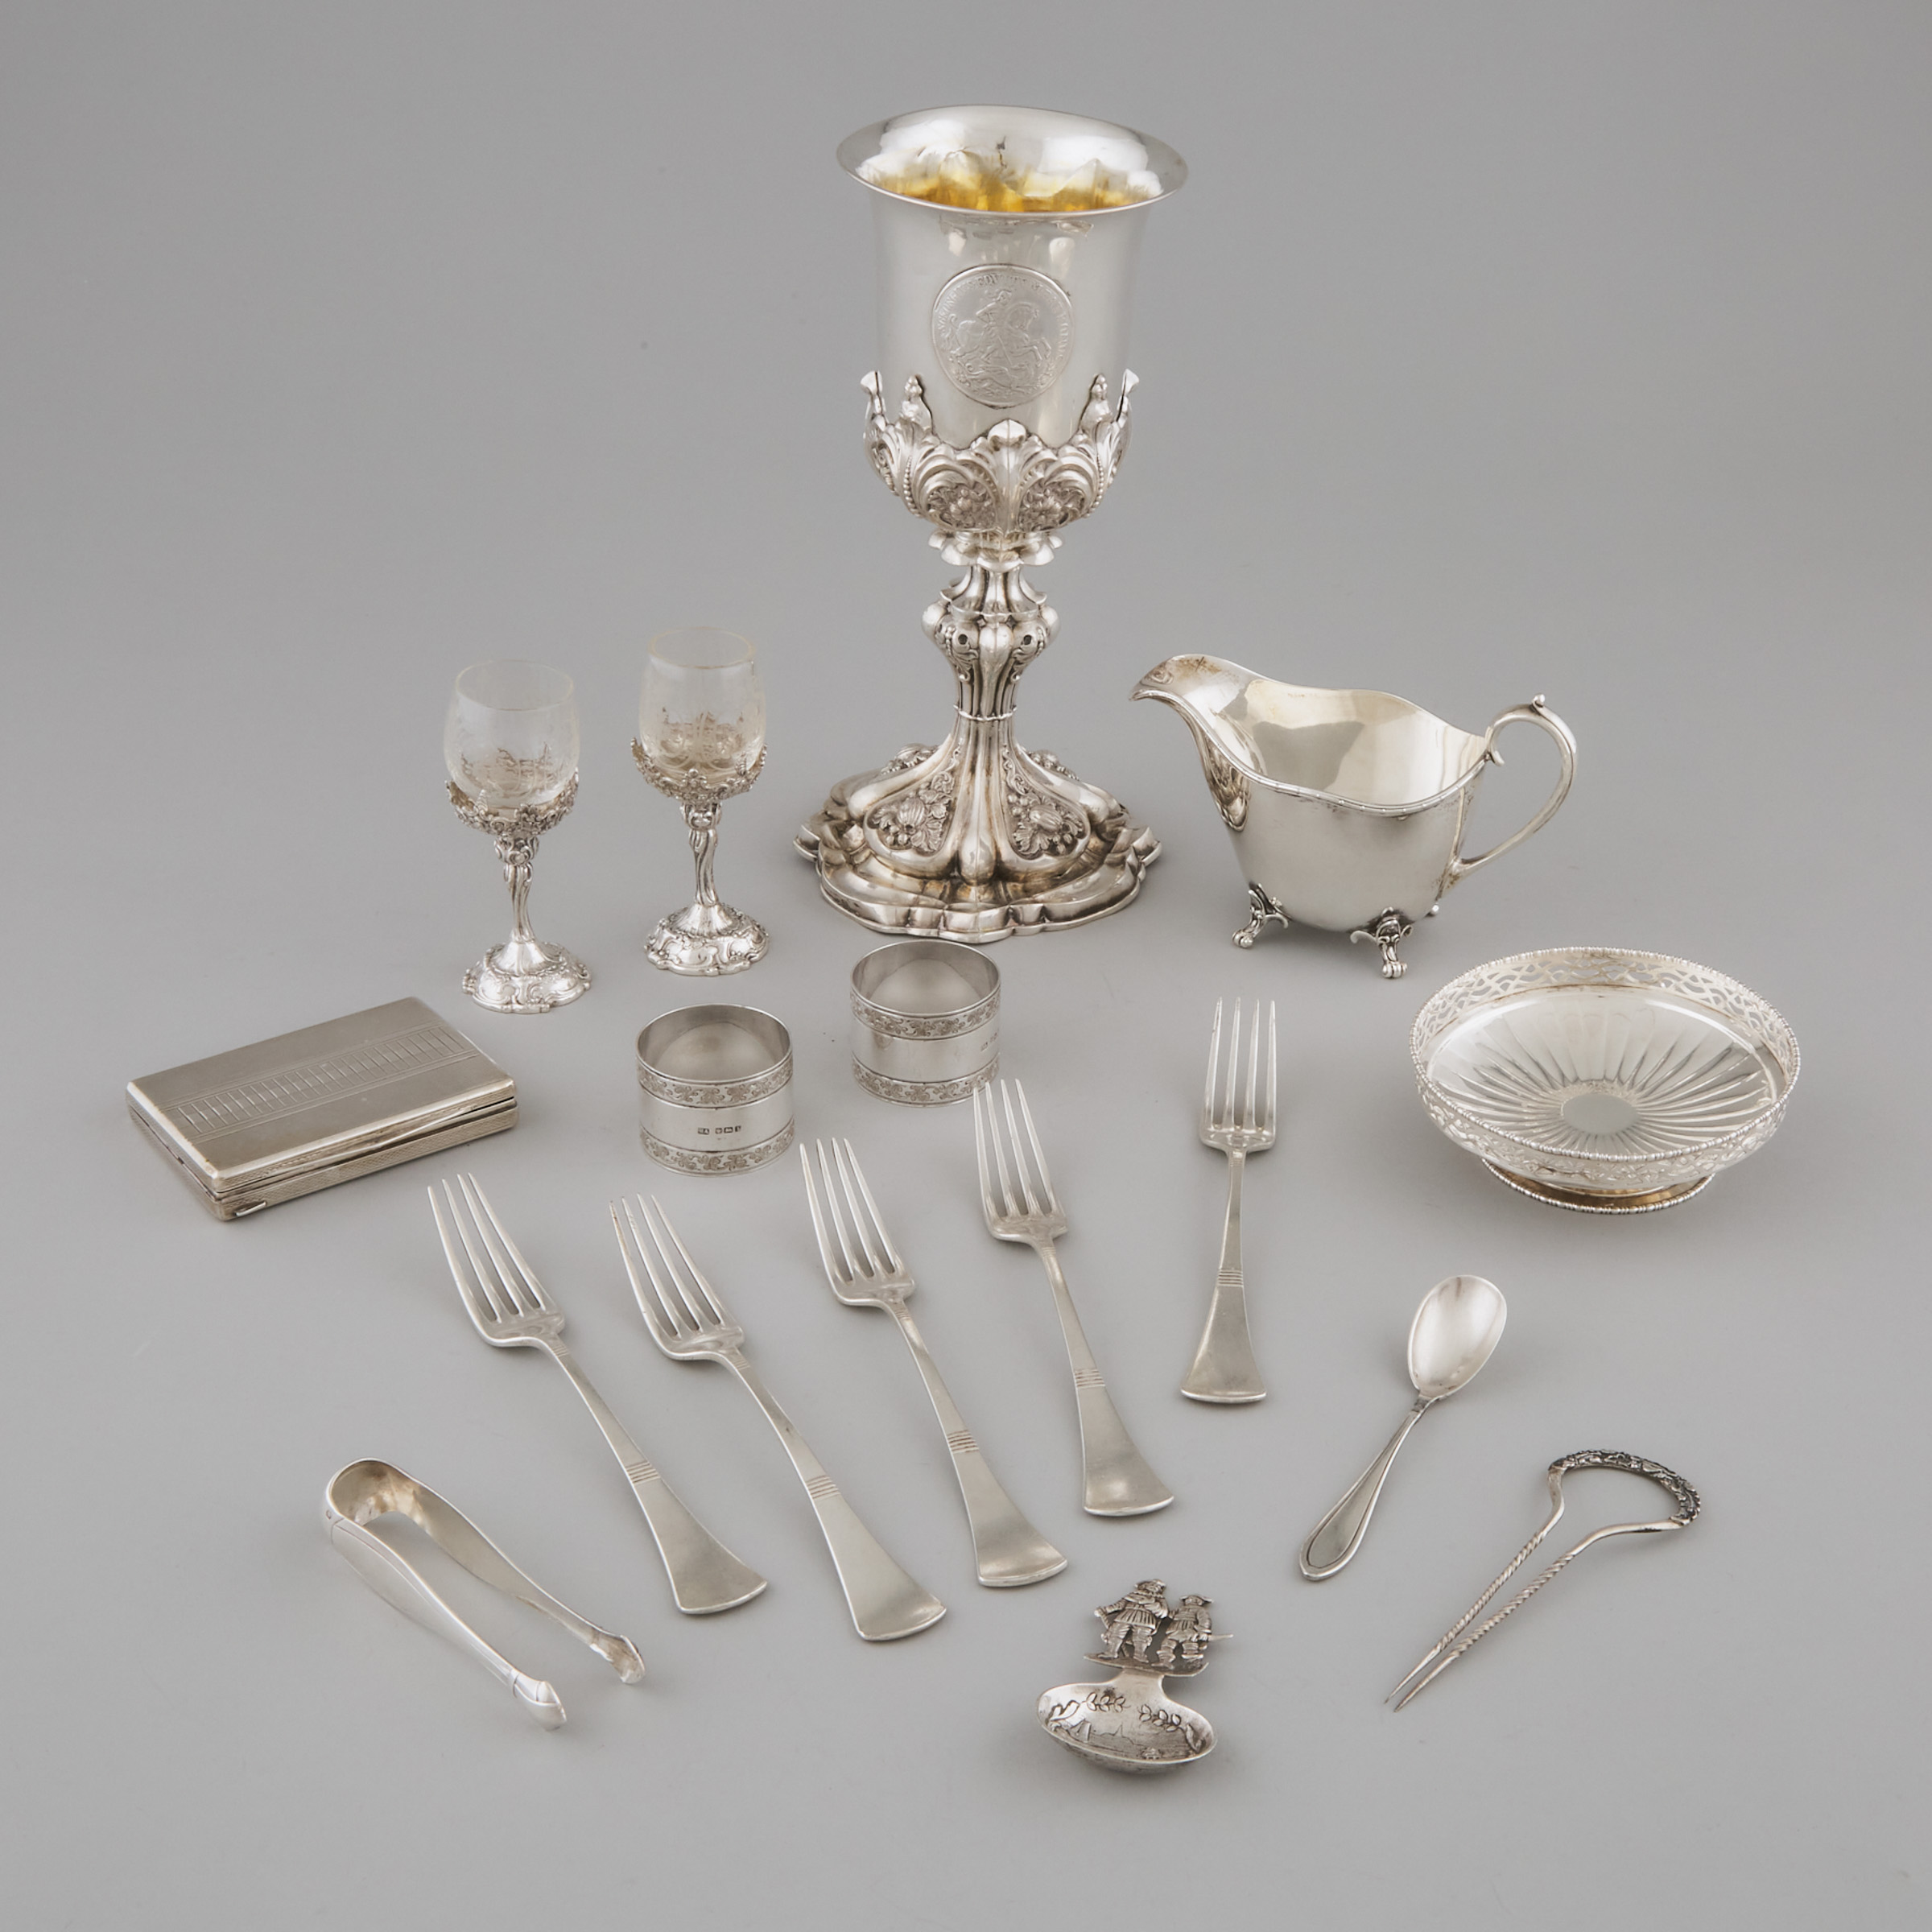 Group of English and Continental Silver, 19th/20th century